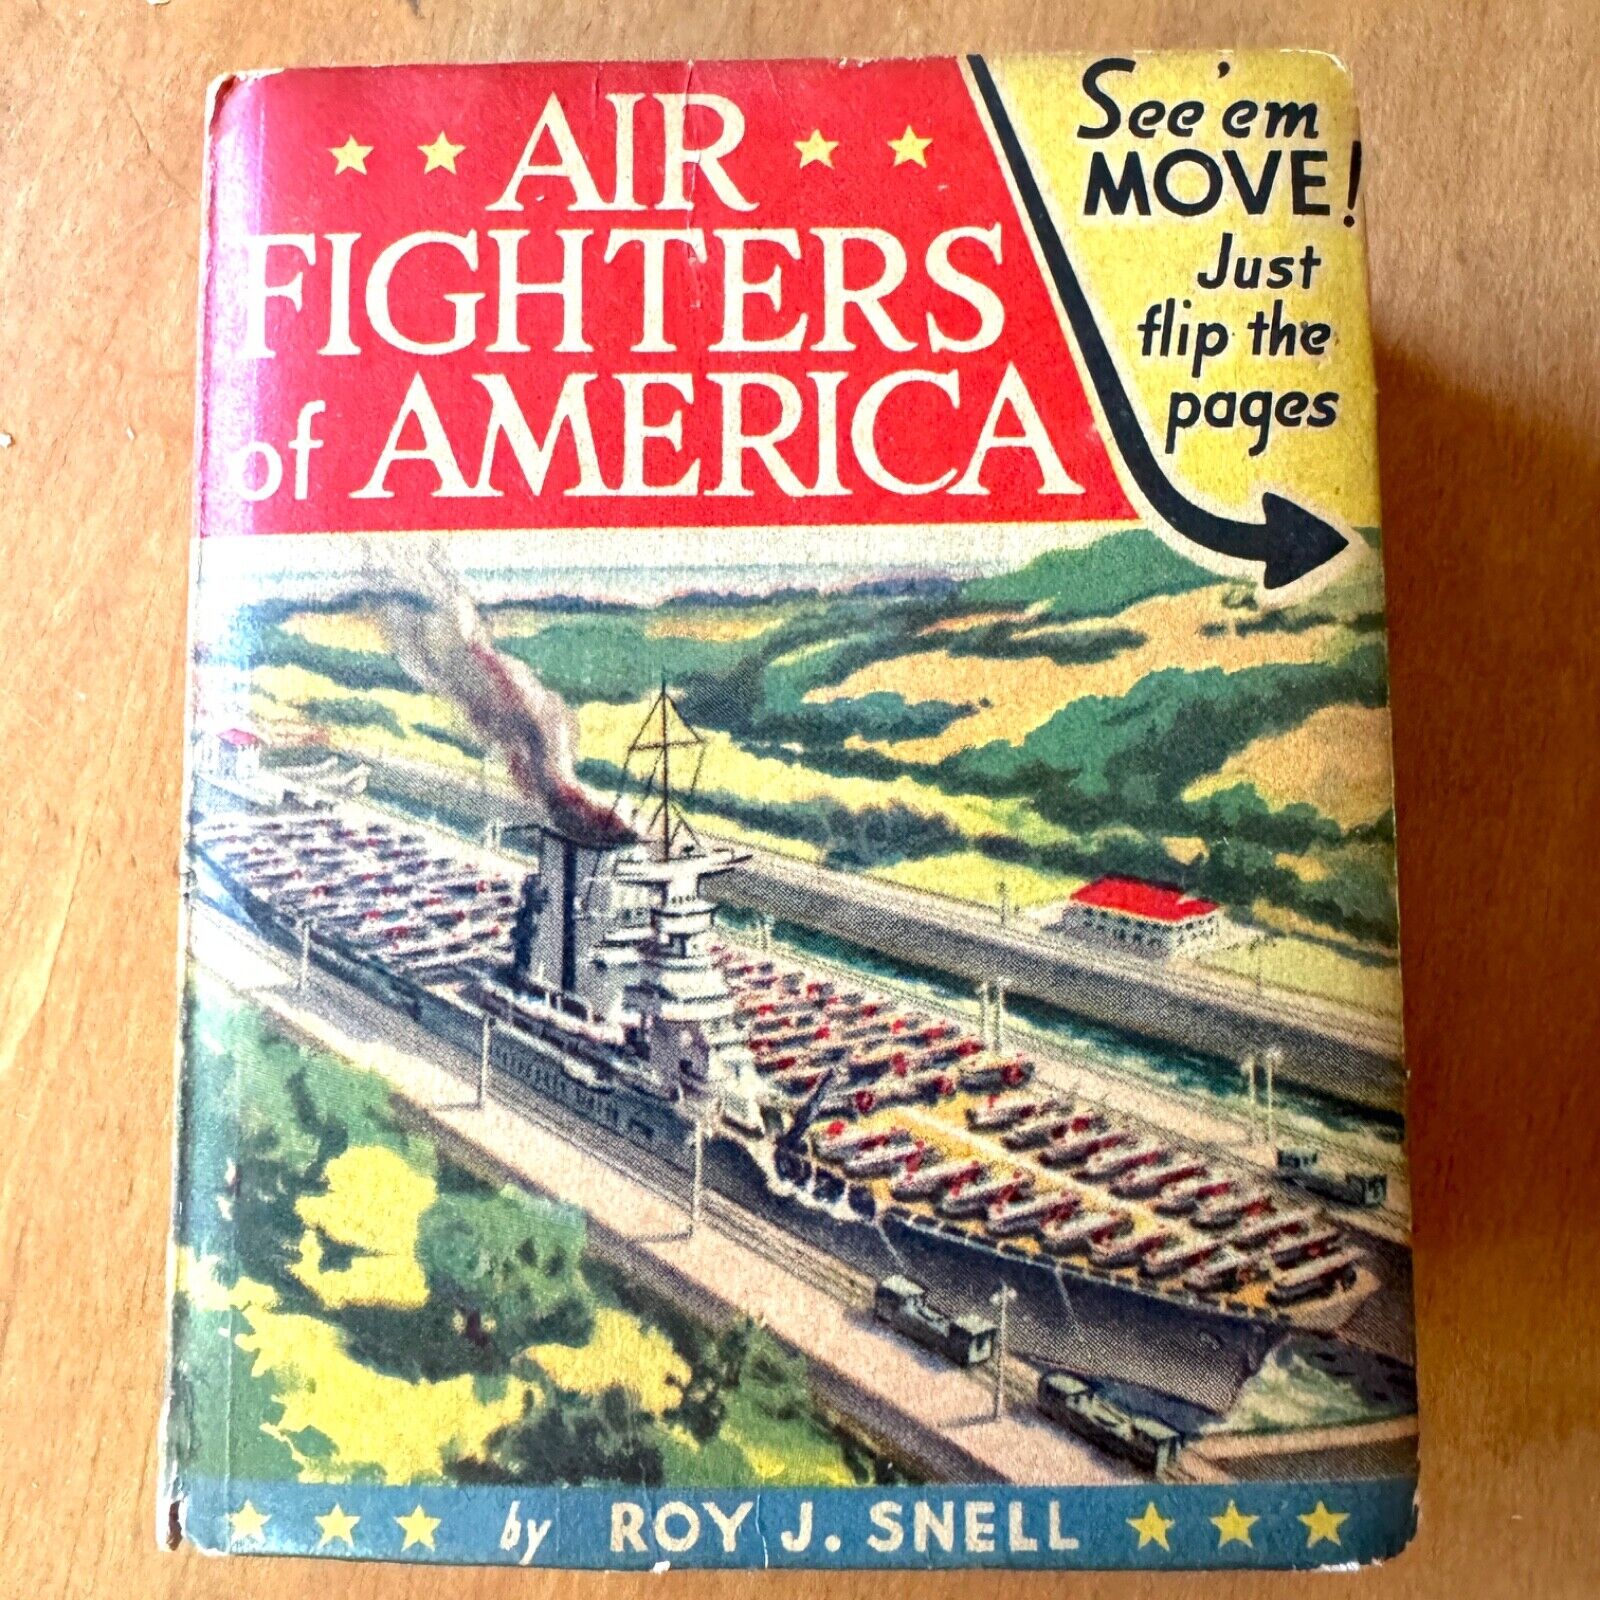 Air Fighters of America, c. 1941, The Better Little Book 1448, Roy J. Snell